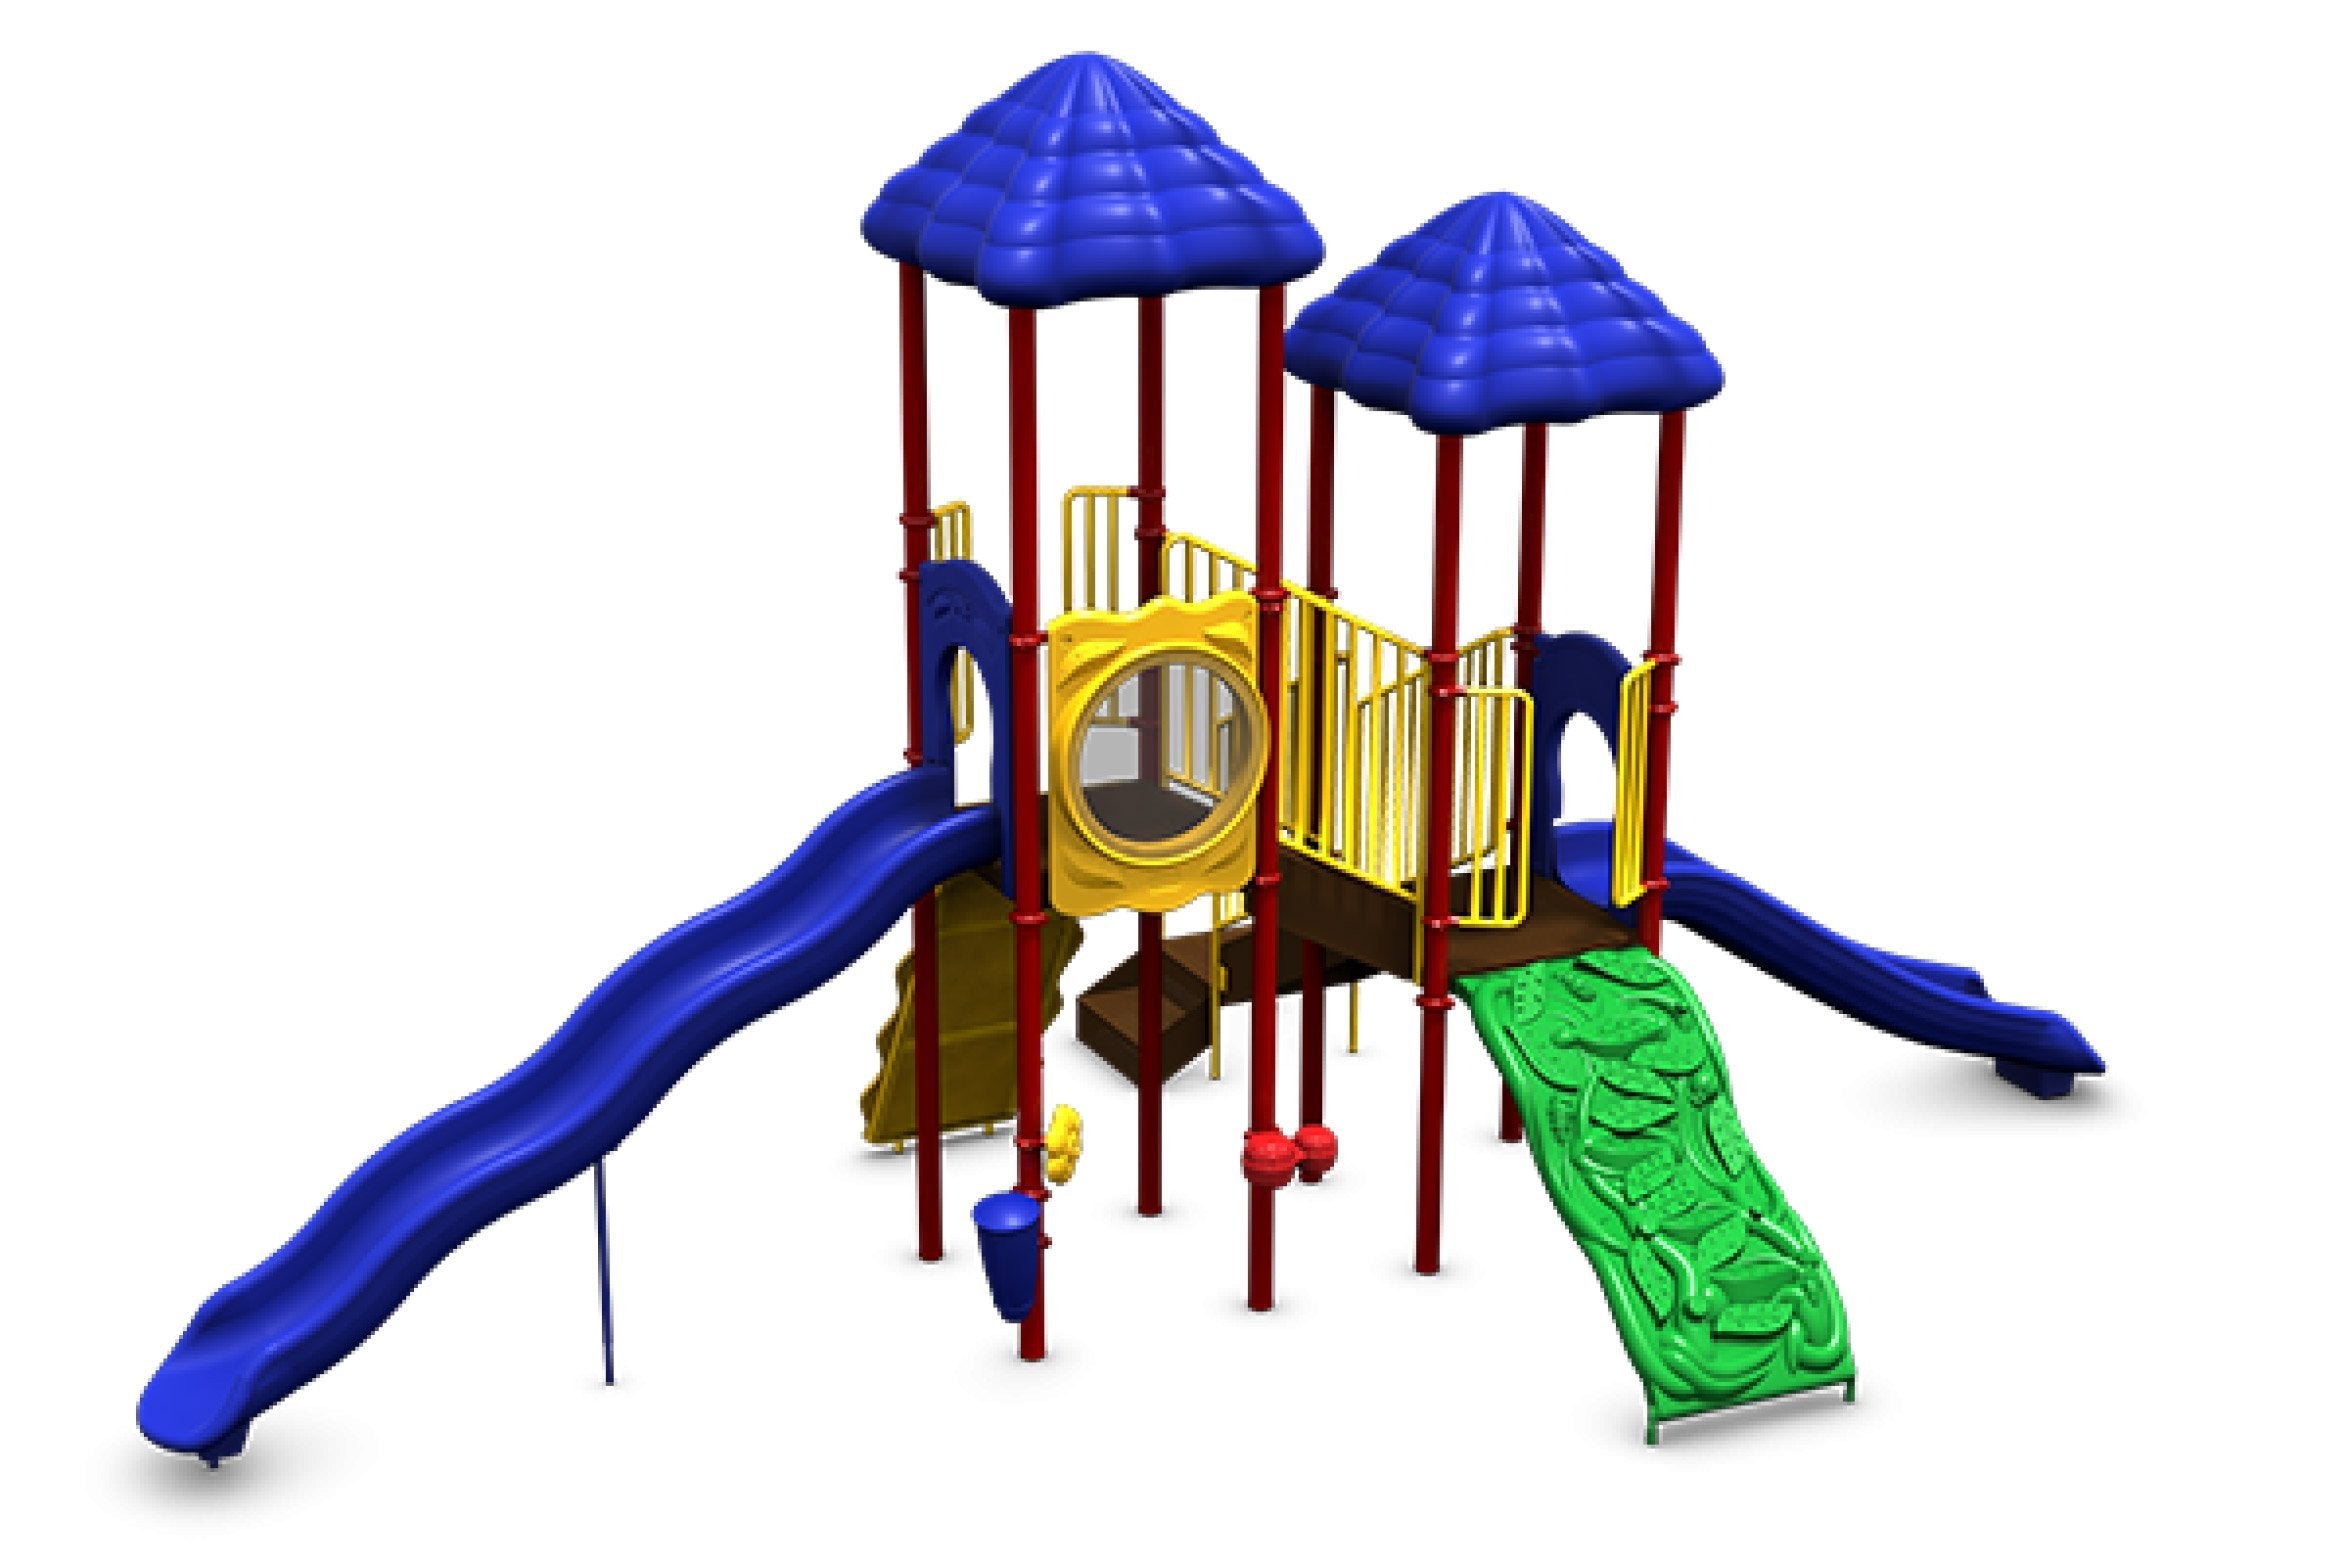 Bighorn Playsystem - Natural or Playful Colors | WillyGoat Playground & Park Equipment